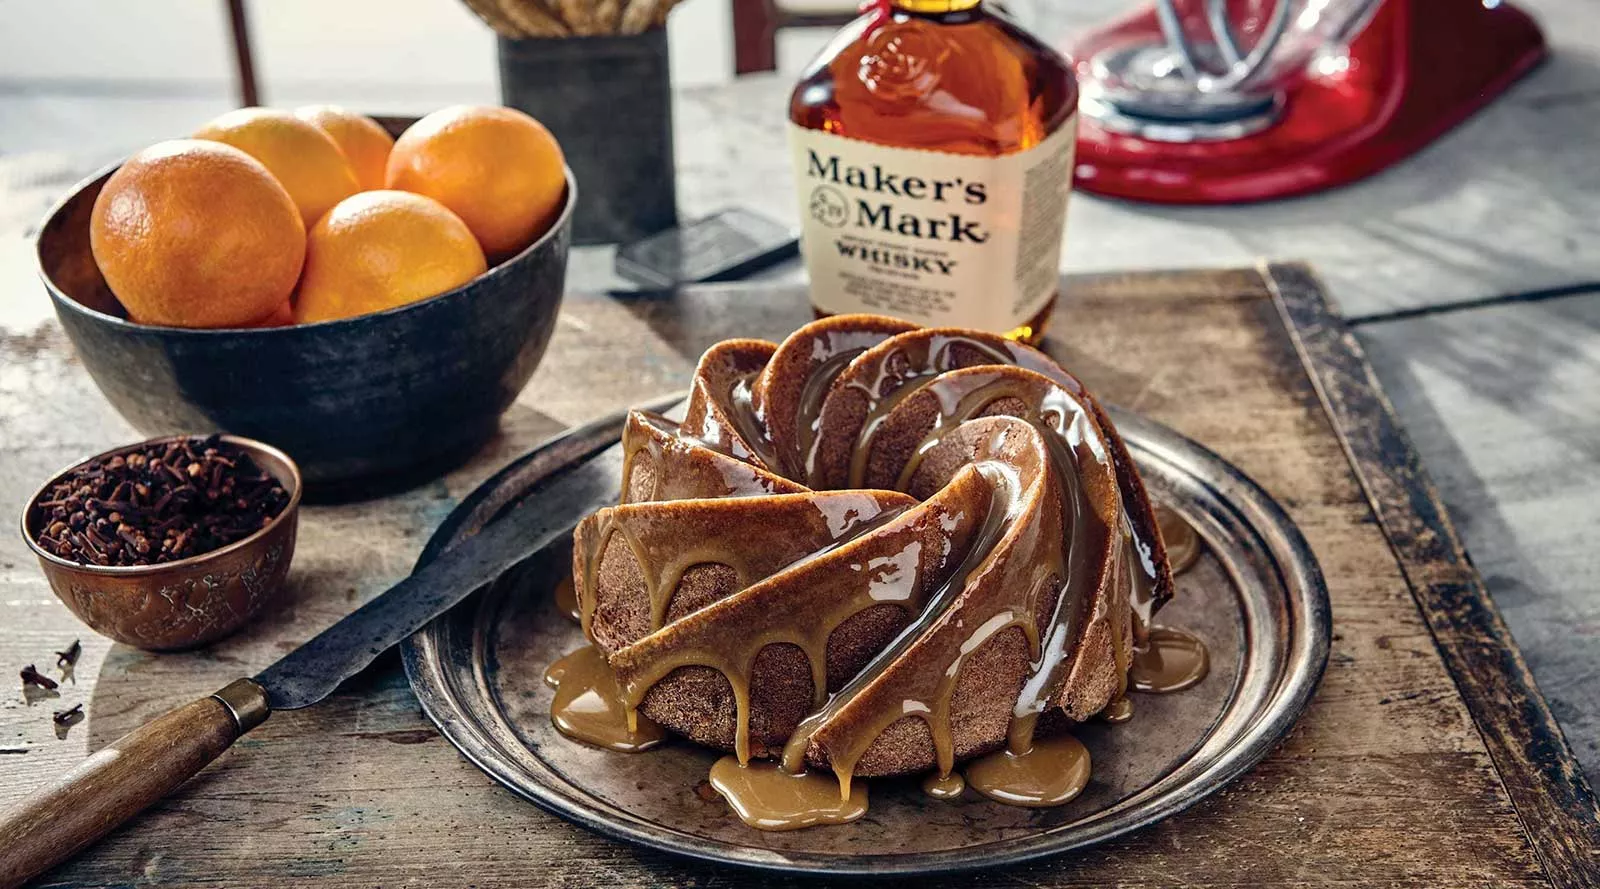 A glazed bundt cake sits on a round baking sheet, next to a bowl of fresh oranges, spices, and a bottle of Maker's Mark.